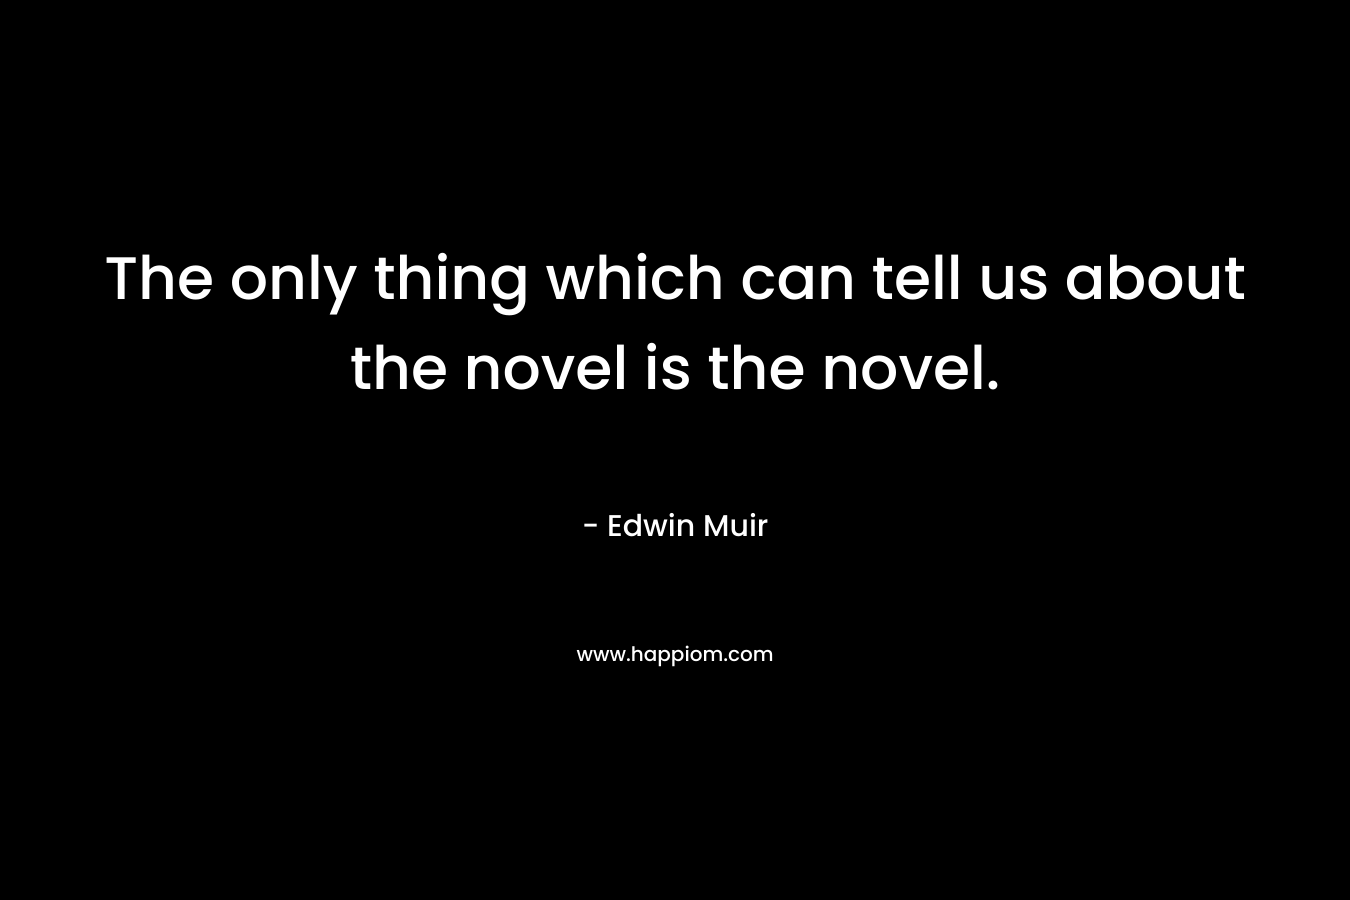 The only thing which can tell us about the novel is the novel.